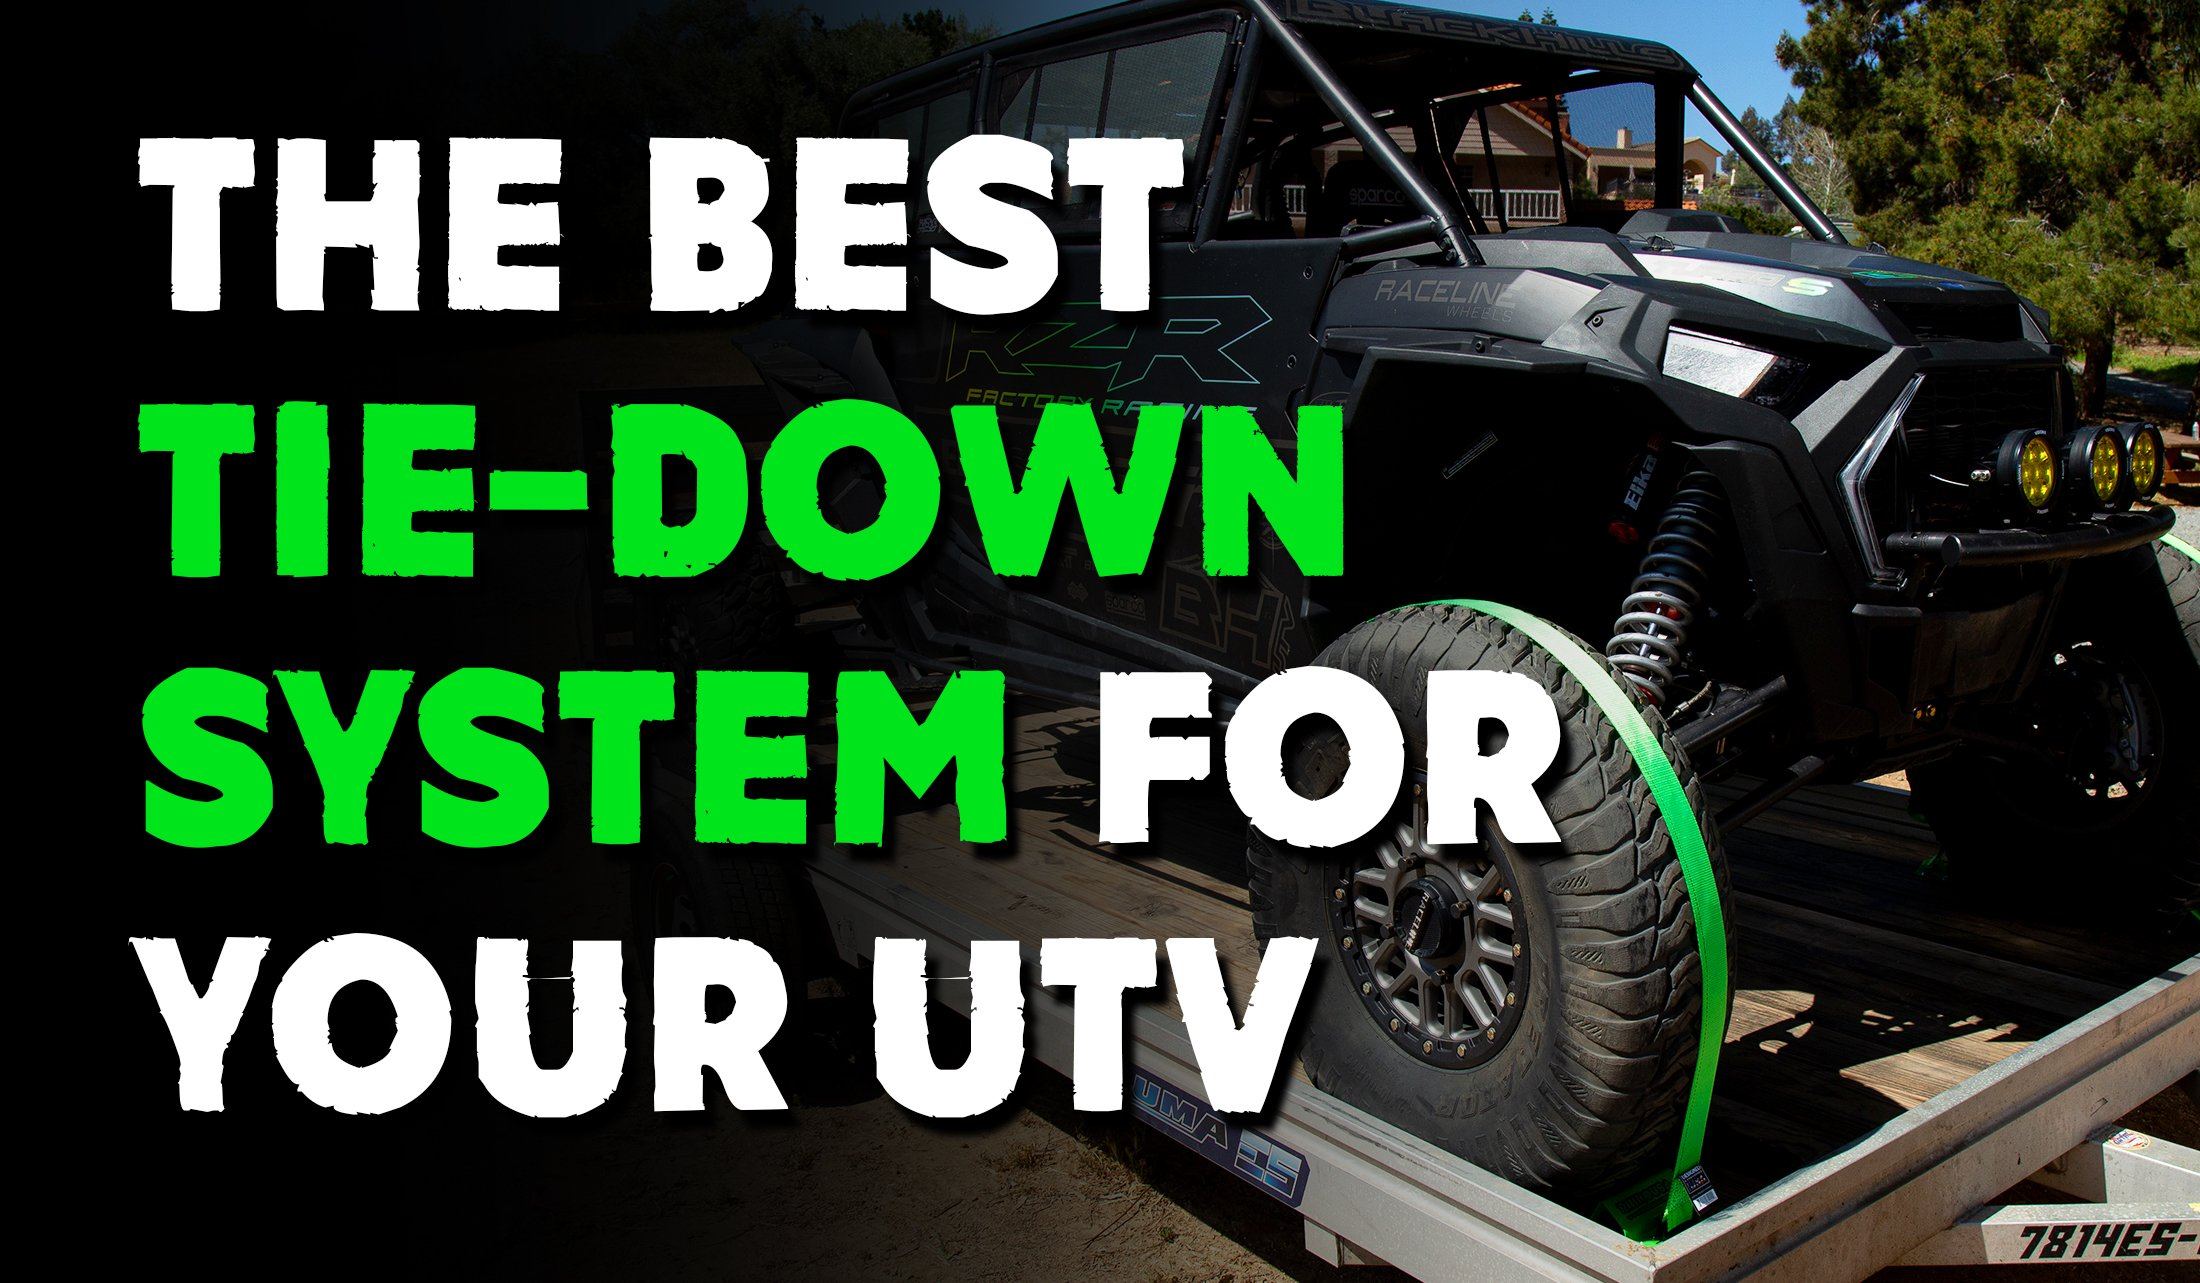 The BEST Wheel Tie-Down System for Your UTV is HERE!